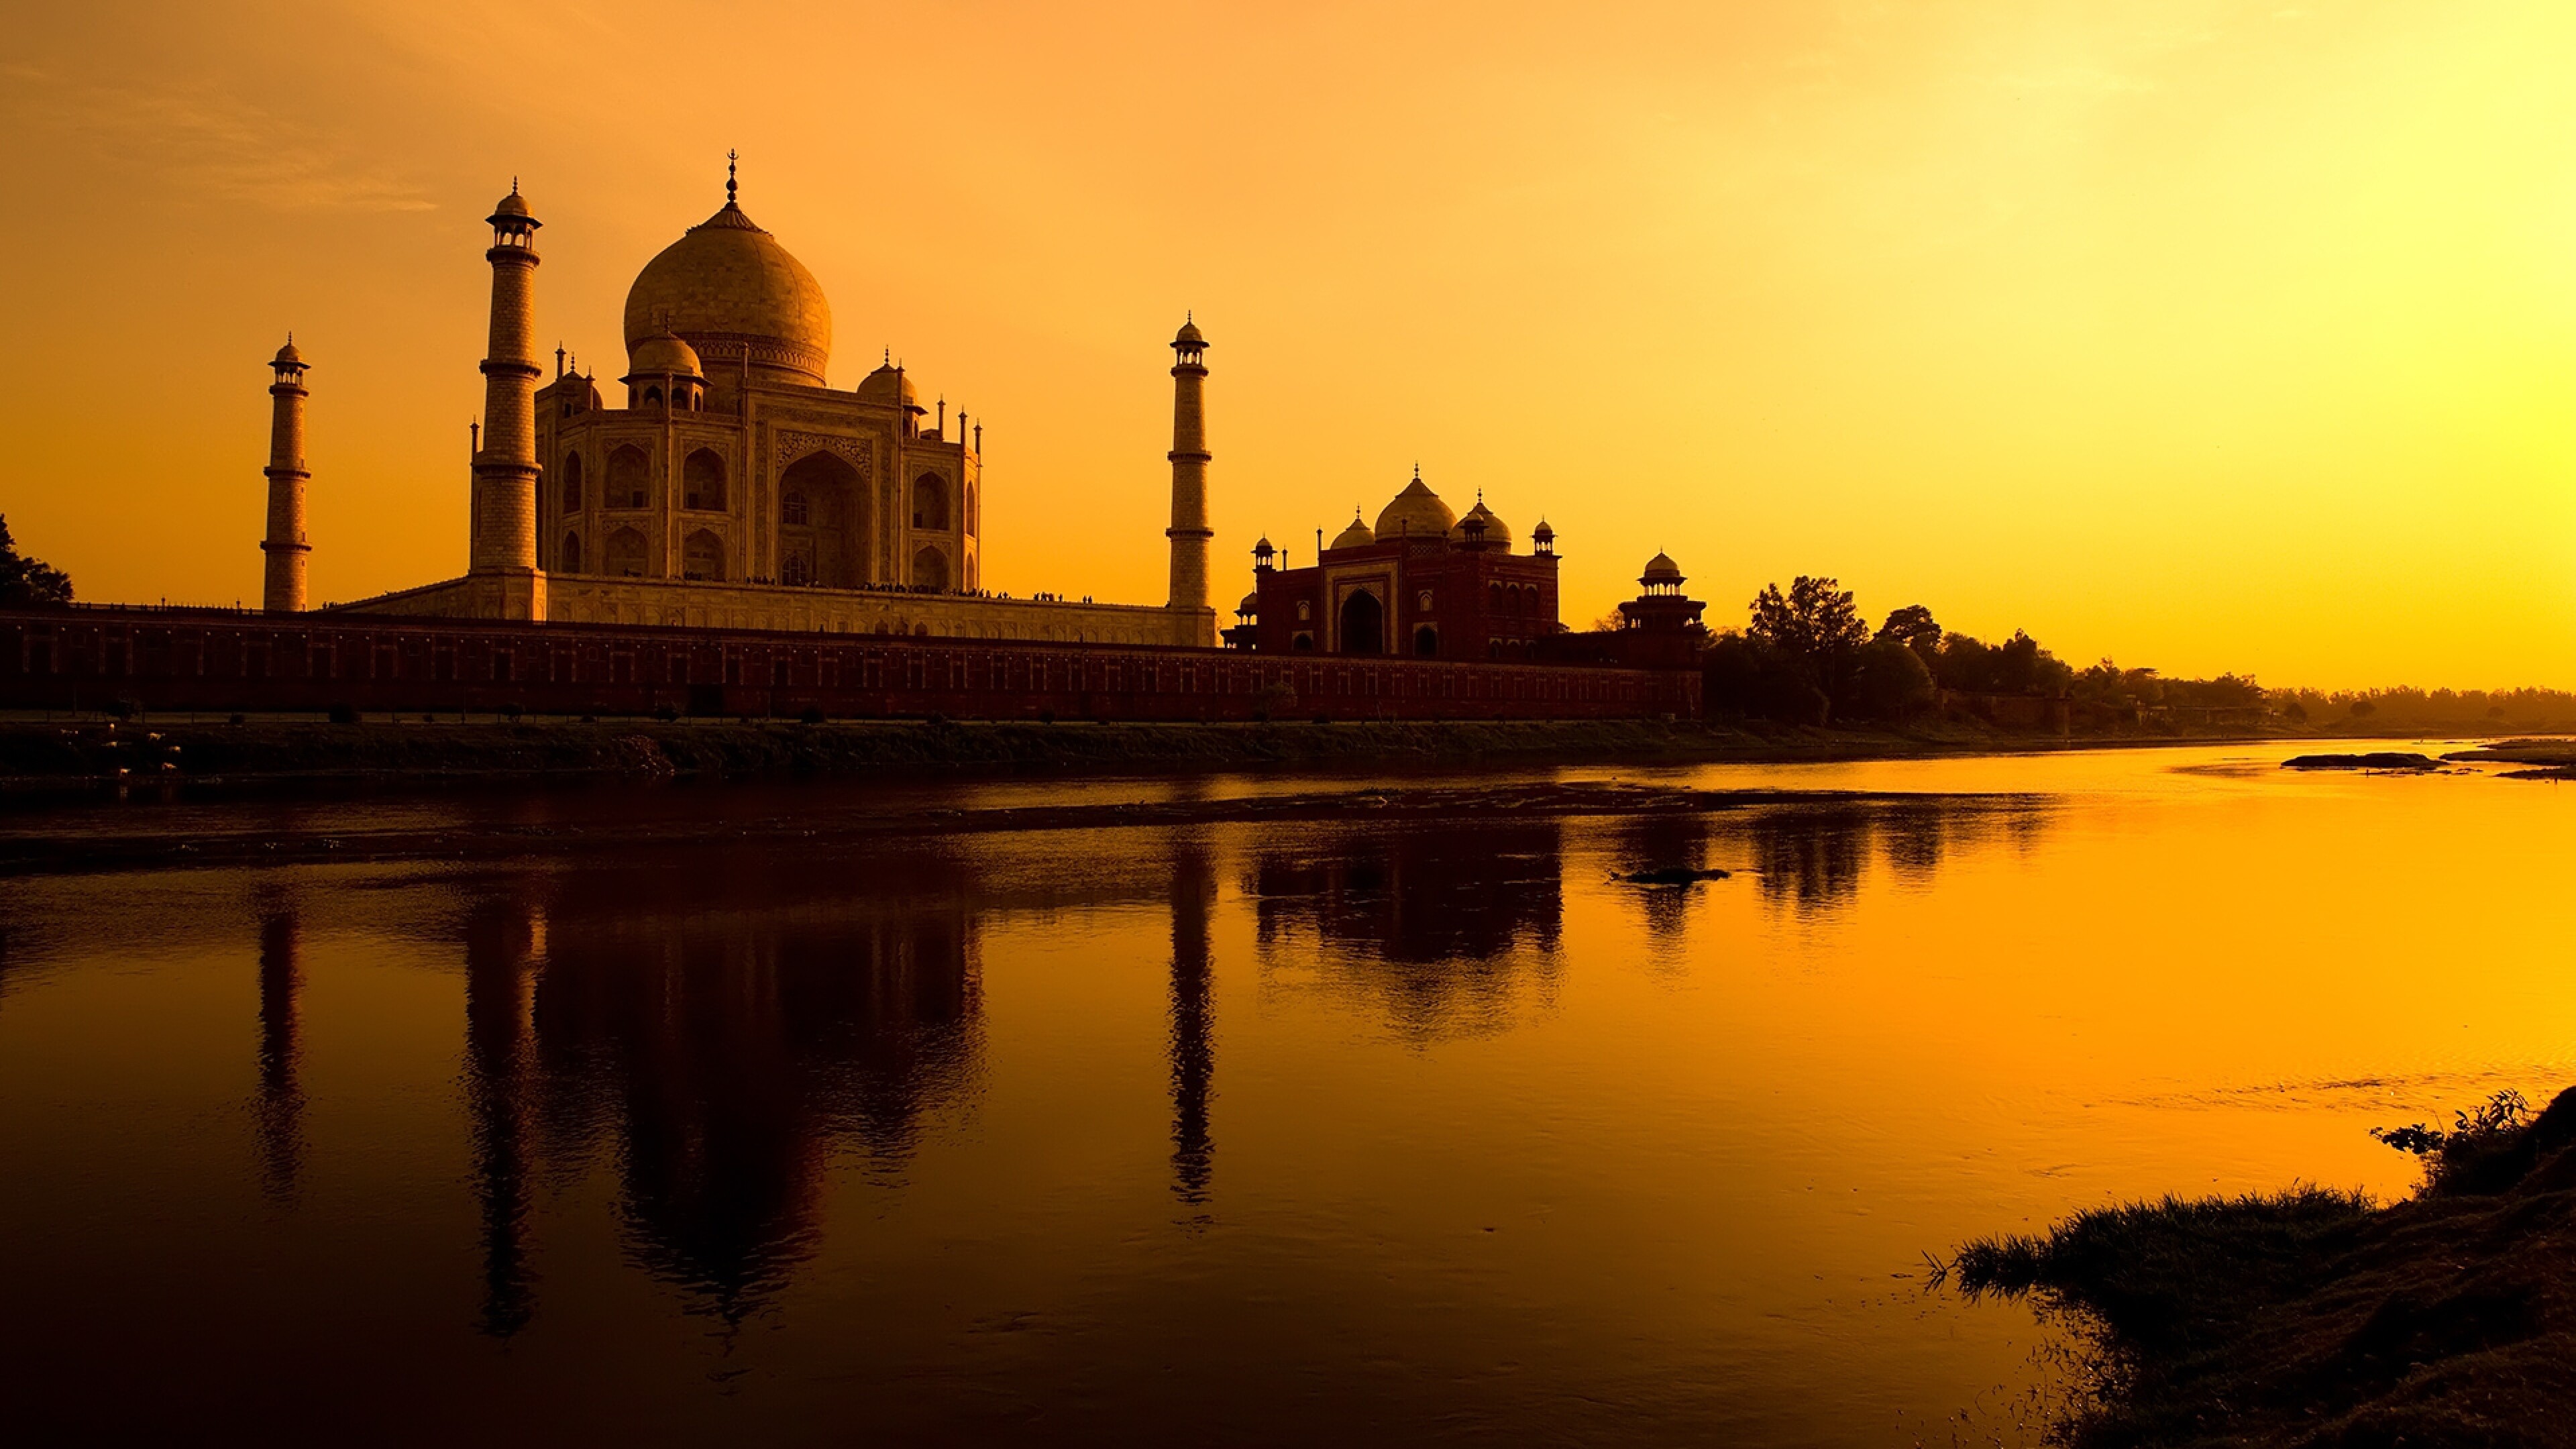 India: Taj Mahal, Regarded by many as the best example of Mughal architecture and a symbol of India's rich history. 3840x2160 4K Background.